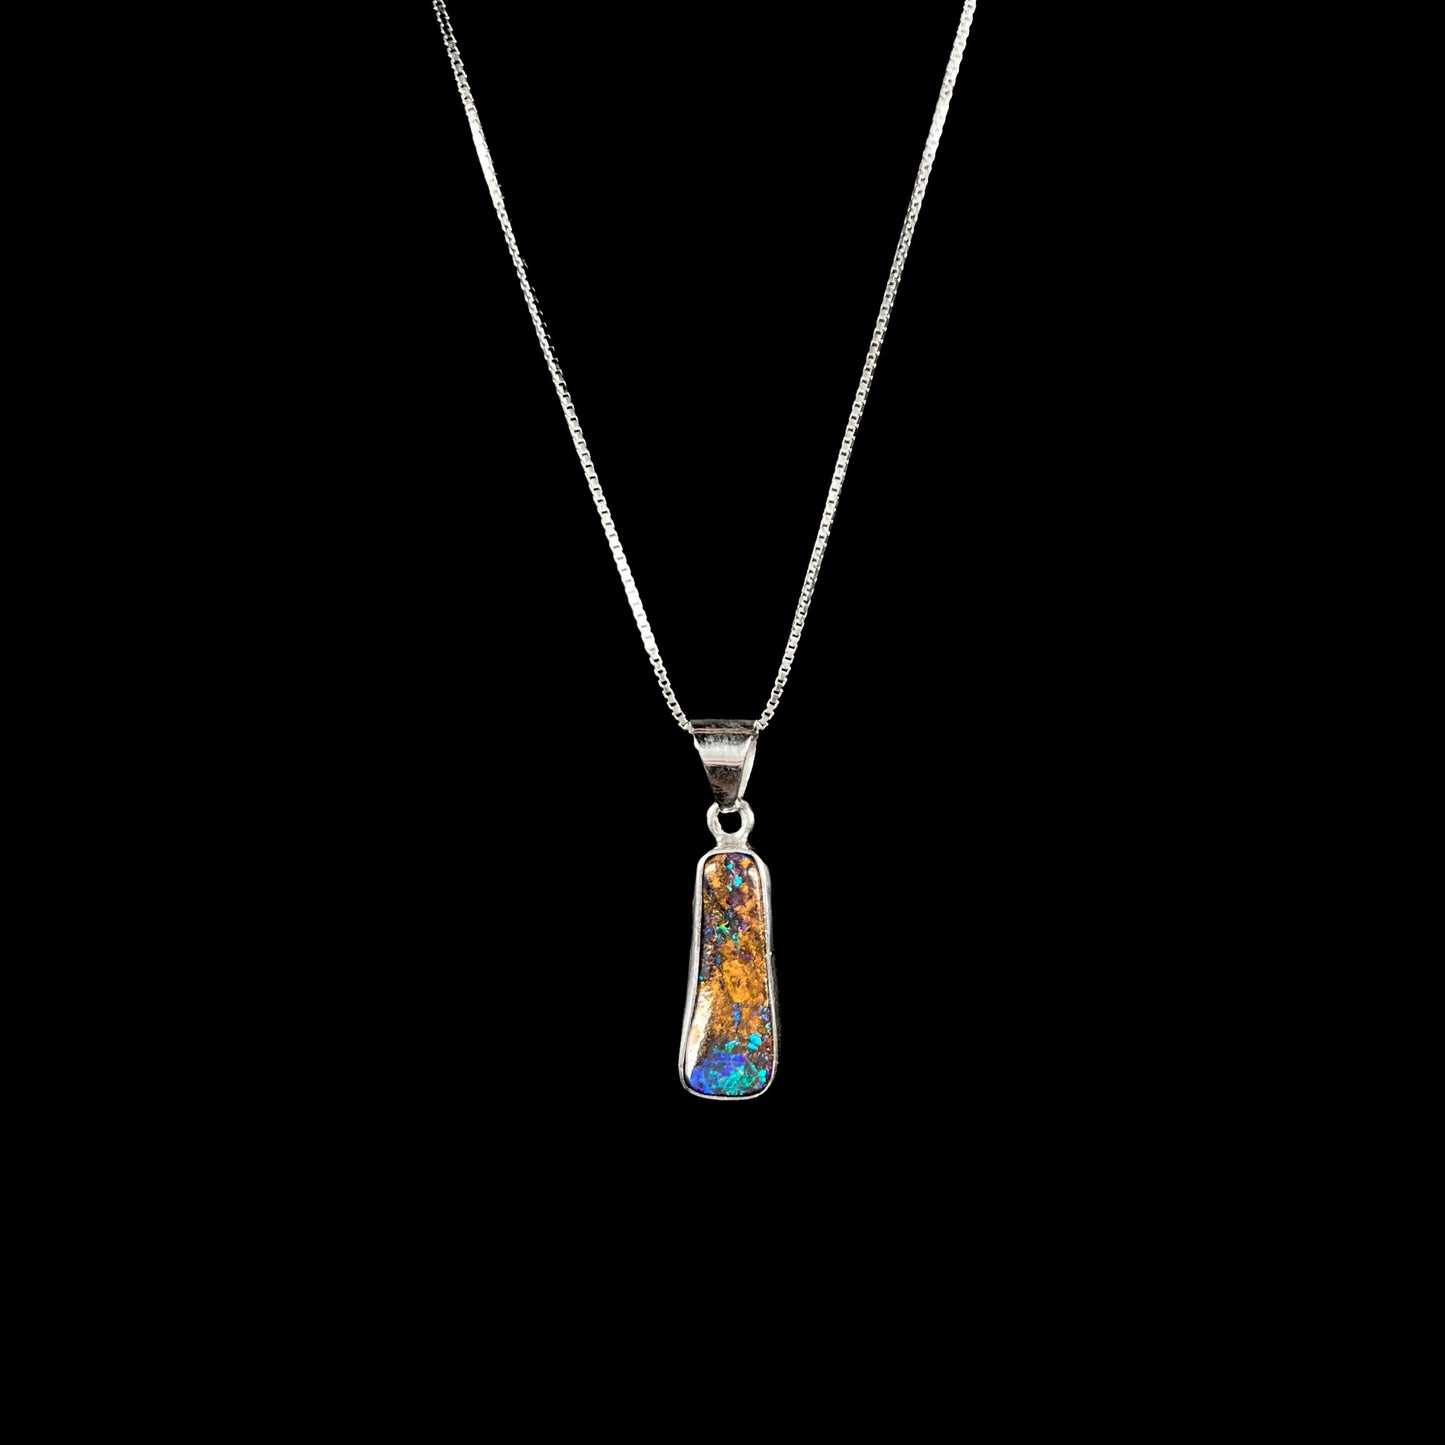 A sterling silver necklace bezel set with a natural Australian boulder opal stone.  The stone shines colors of blue, green, and purple.